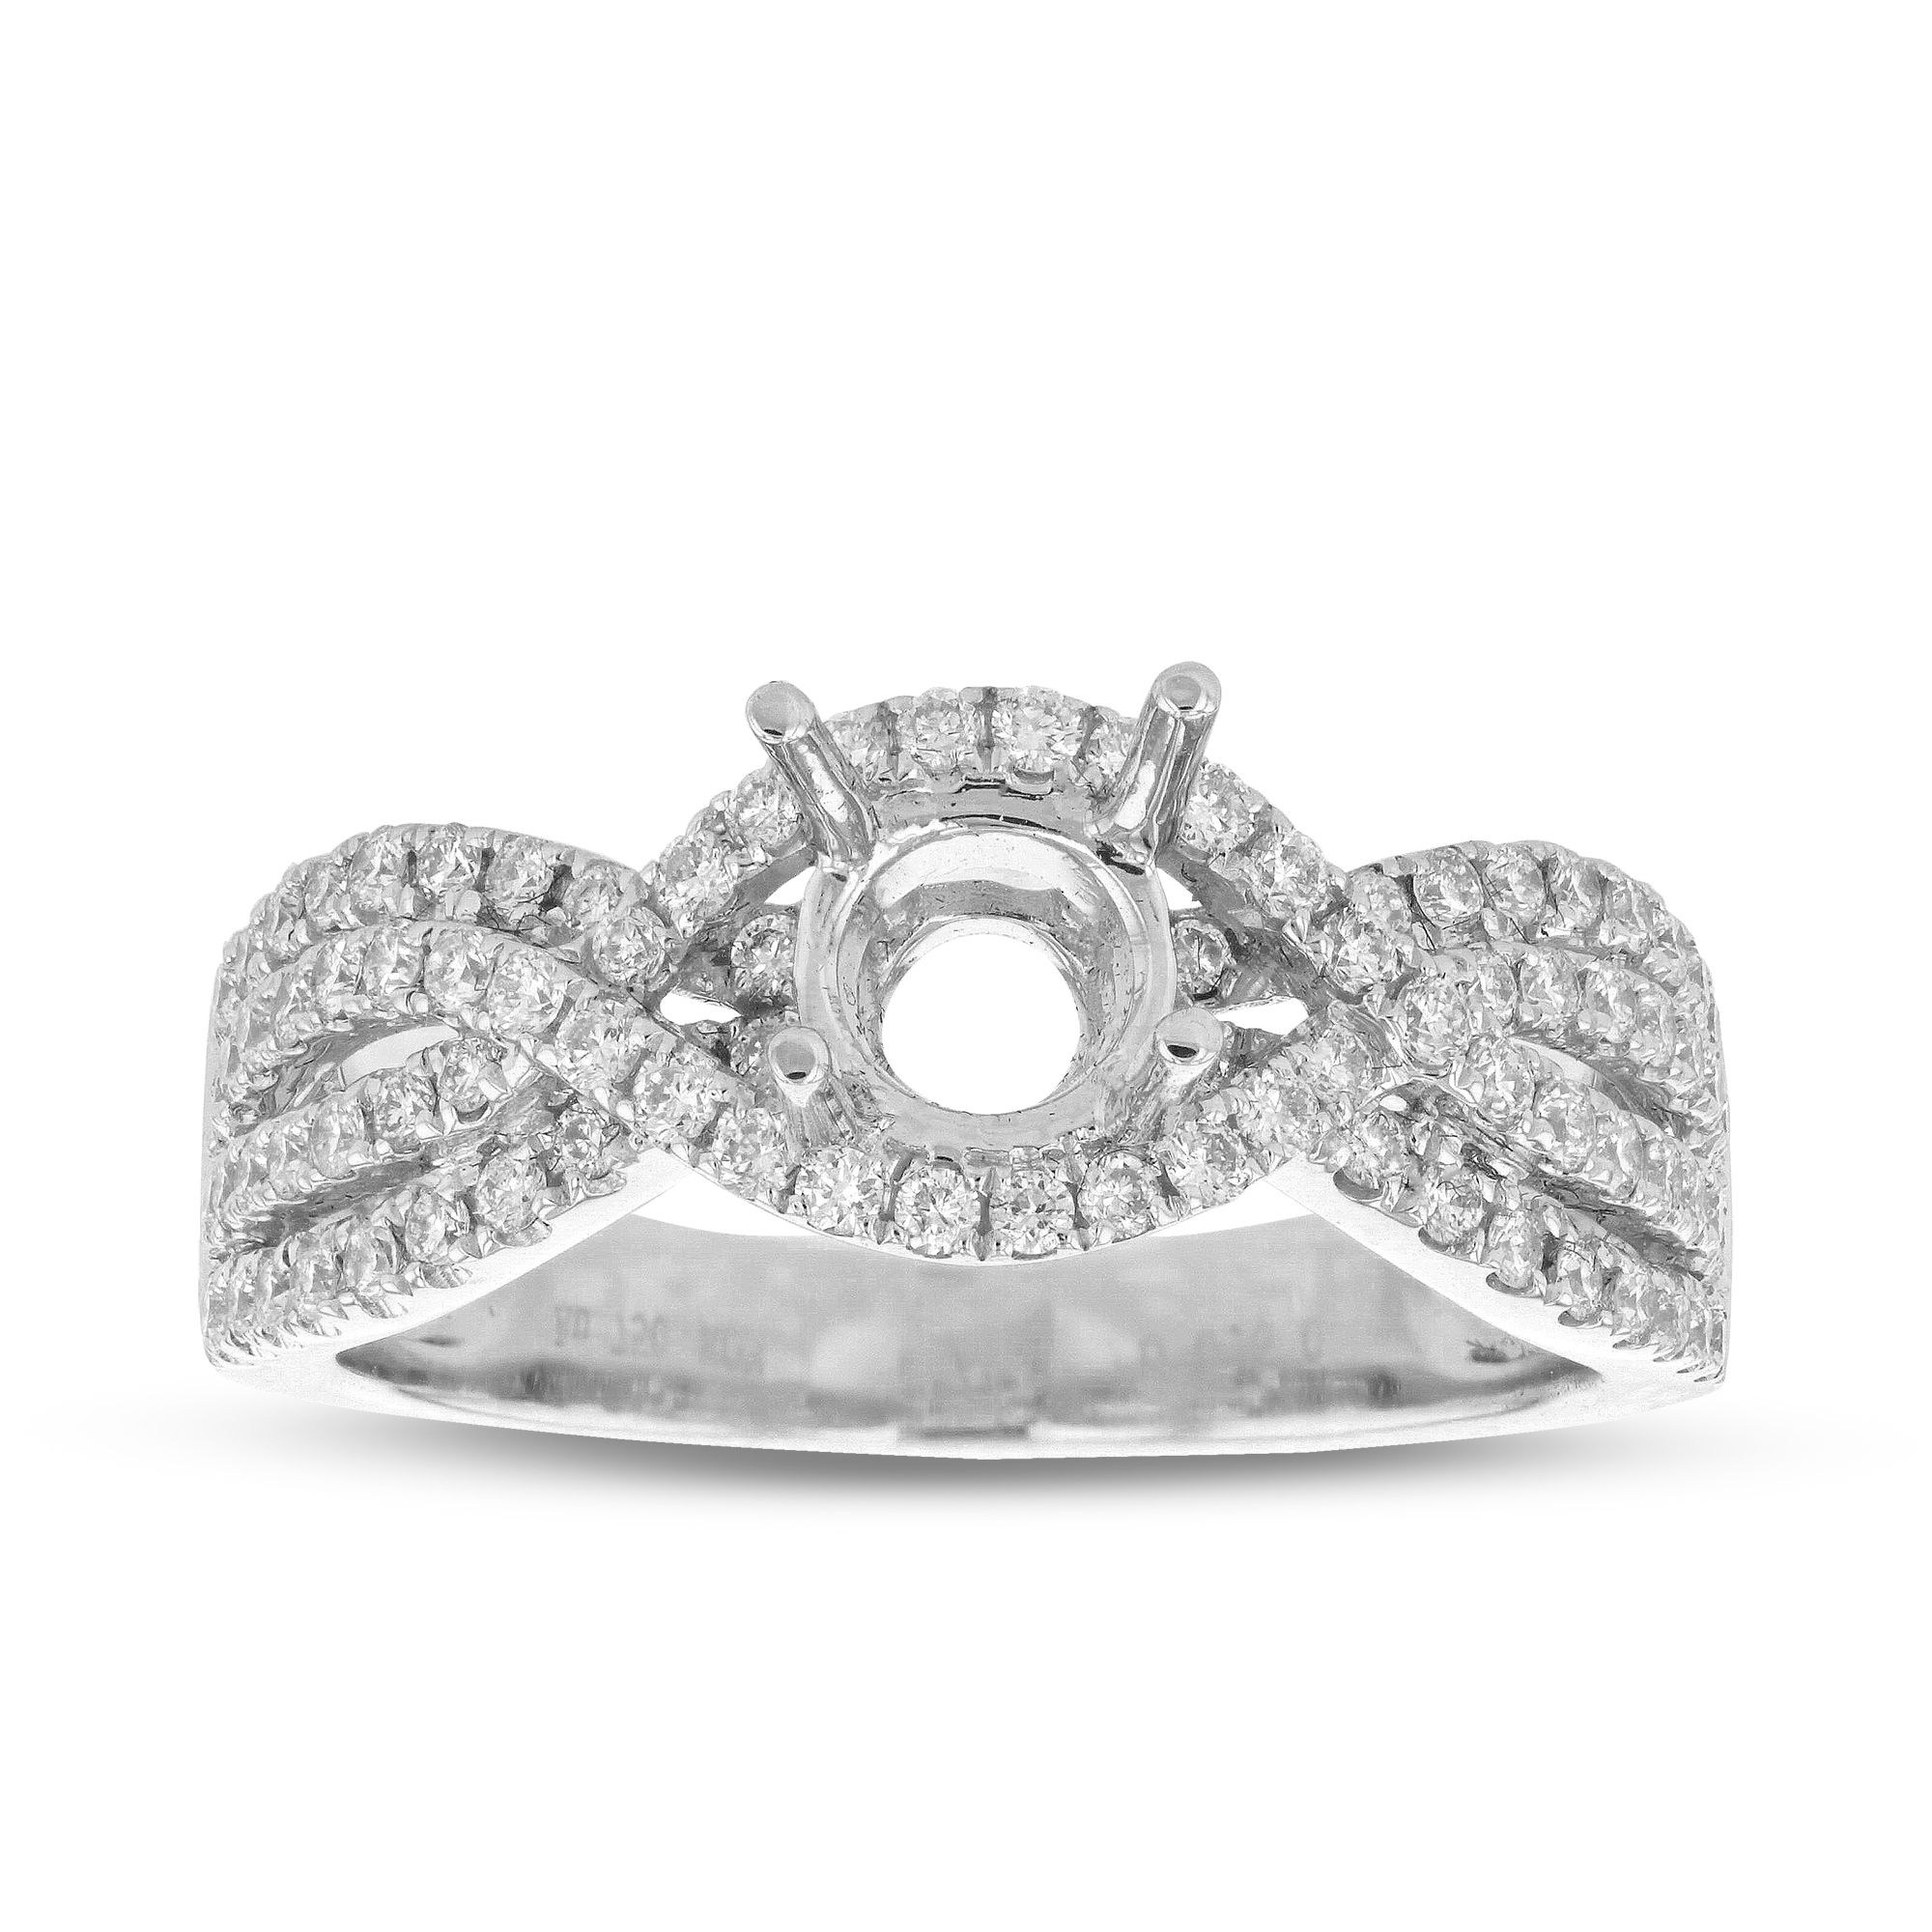 View 0.60ctw Diamond Semi Mount Engagement Ring in 18k White Gold